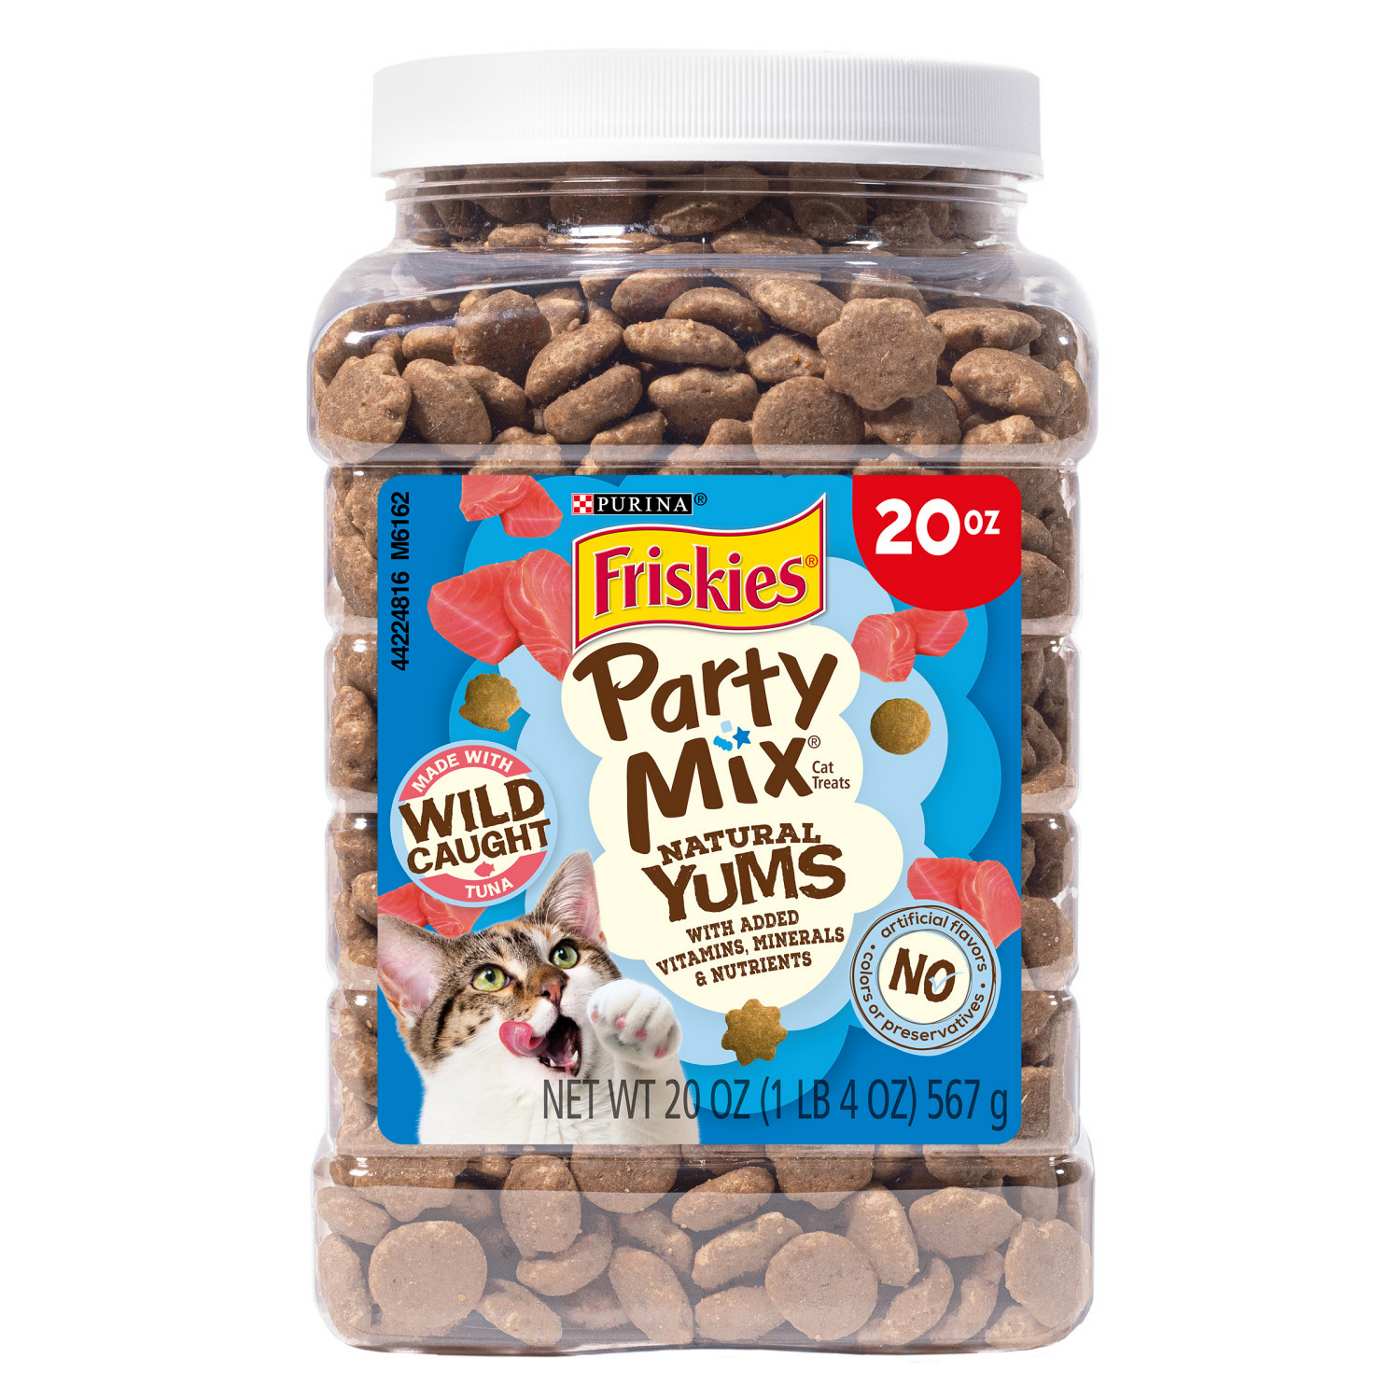 Friskies Purina Friskies Natural Cat Treats, Party Mix Natural Yums With Wild Caught Tuna and added vitamins, minerals and nutrients; image 1 of 9